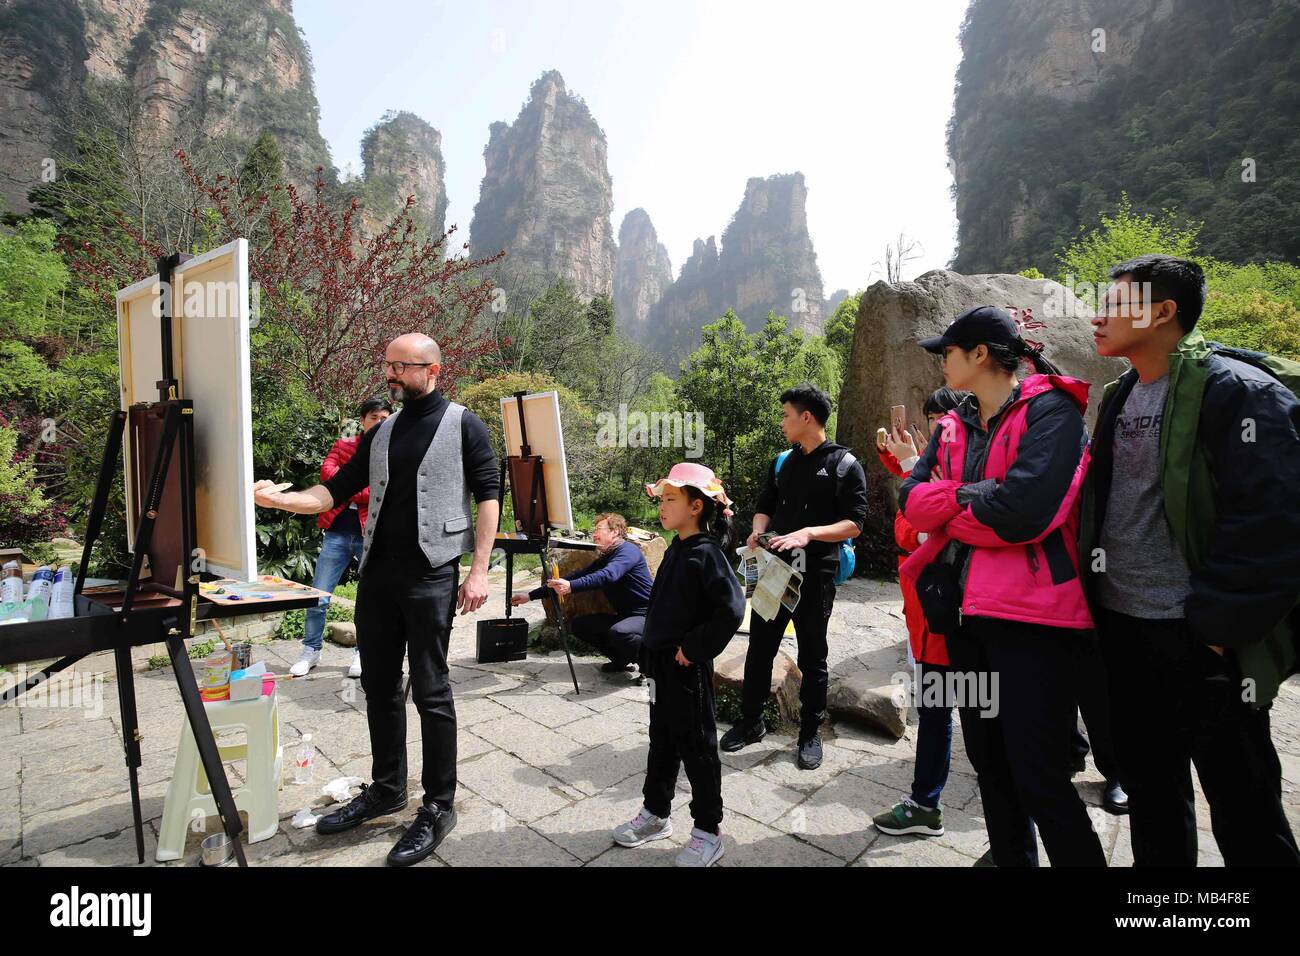 Zhangjiajie, China's Hunan Province. 6th Apr, 2018. Giorgio Distefano (1st L) from Italy paints at Zhangjiajie UNESCO Global Geopark at Wulingyuan District of Zhangjiajie City, central China's Hunan Province, April 6, 2018. About 21 artists coming from Italy took part in a cultural event at the geopark which is known for its quartzose sandstone landform. This geopark is one of the geoparks in China that have already been chosen by UNESCO on its World Network of Geoparks. Credit: Wu Yongbing/Xinhua/Alamy Live News Stock Photo